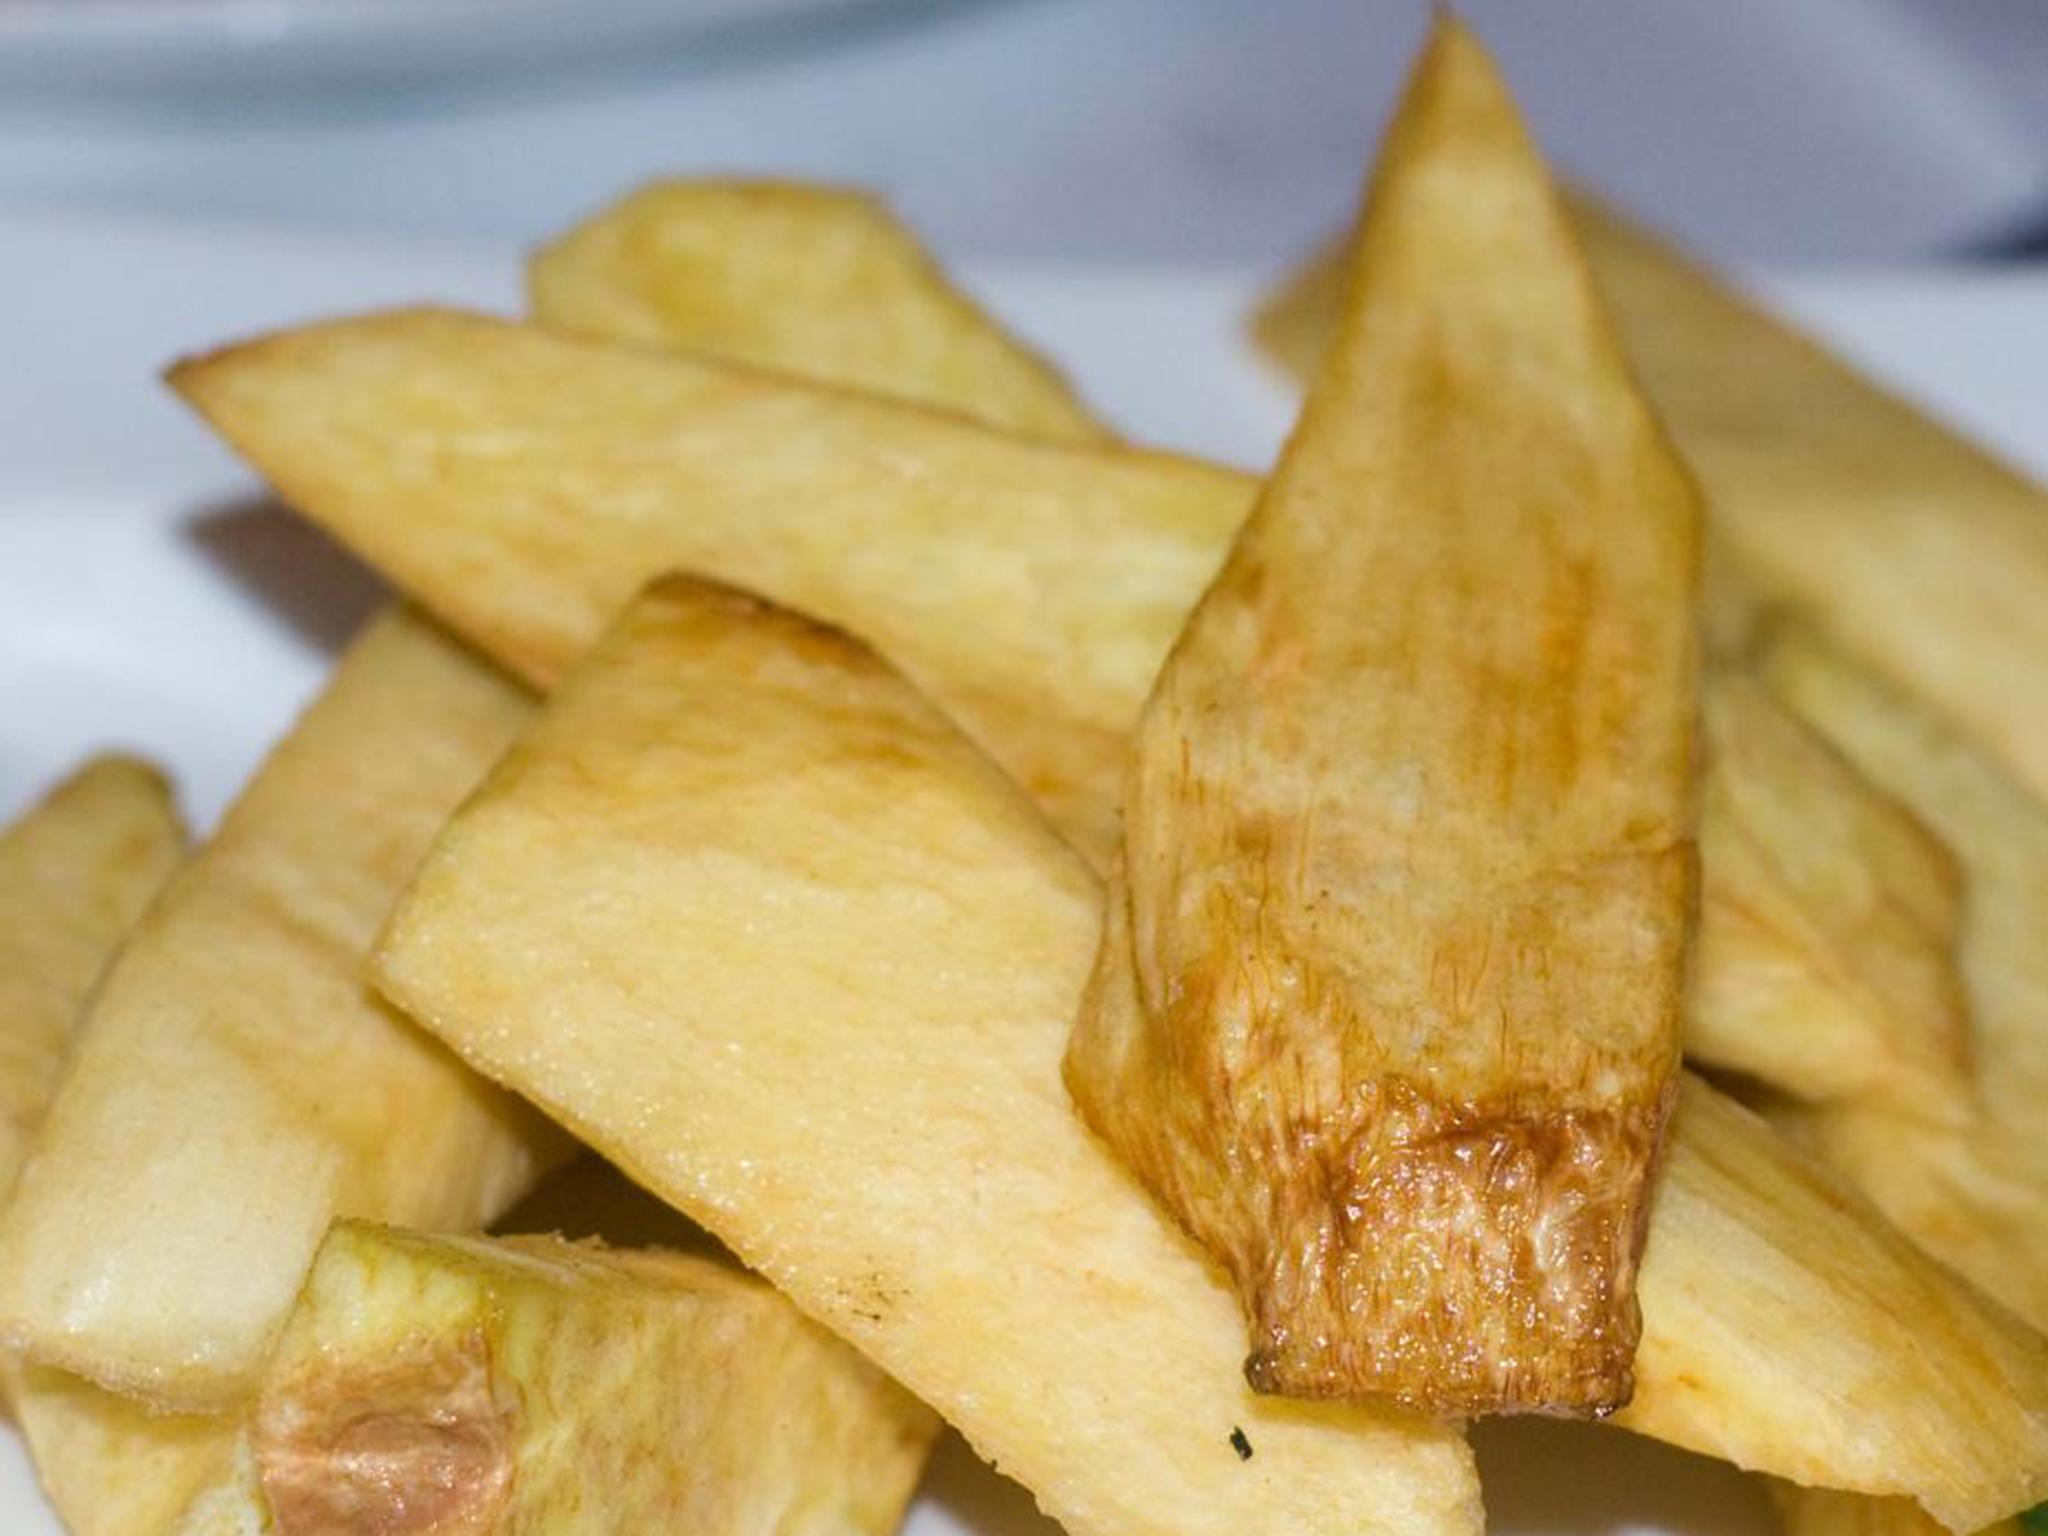 As one of the countrys most-used ingredients, the vegetable can be found as chips everywhere